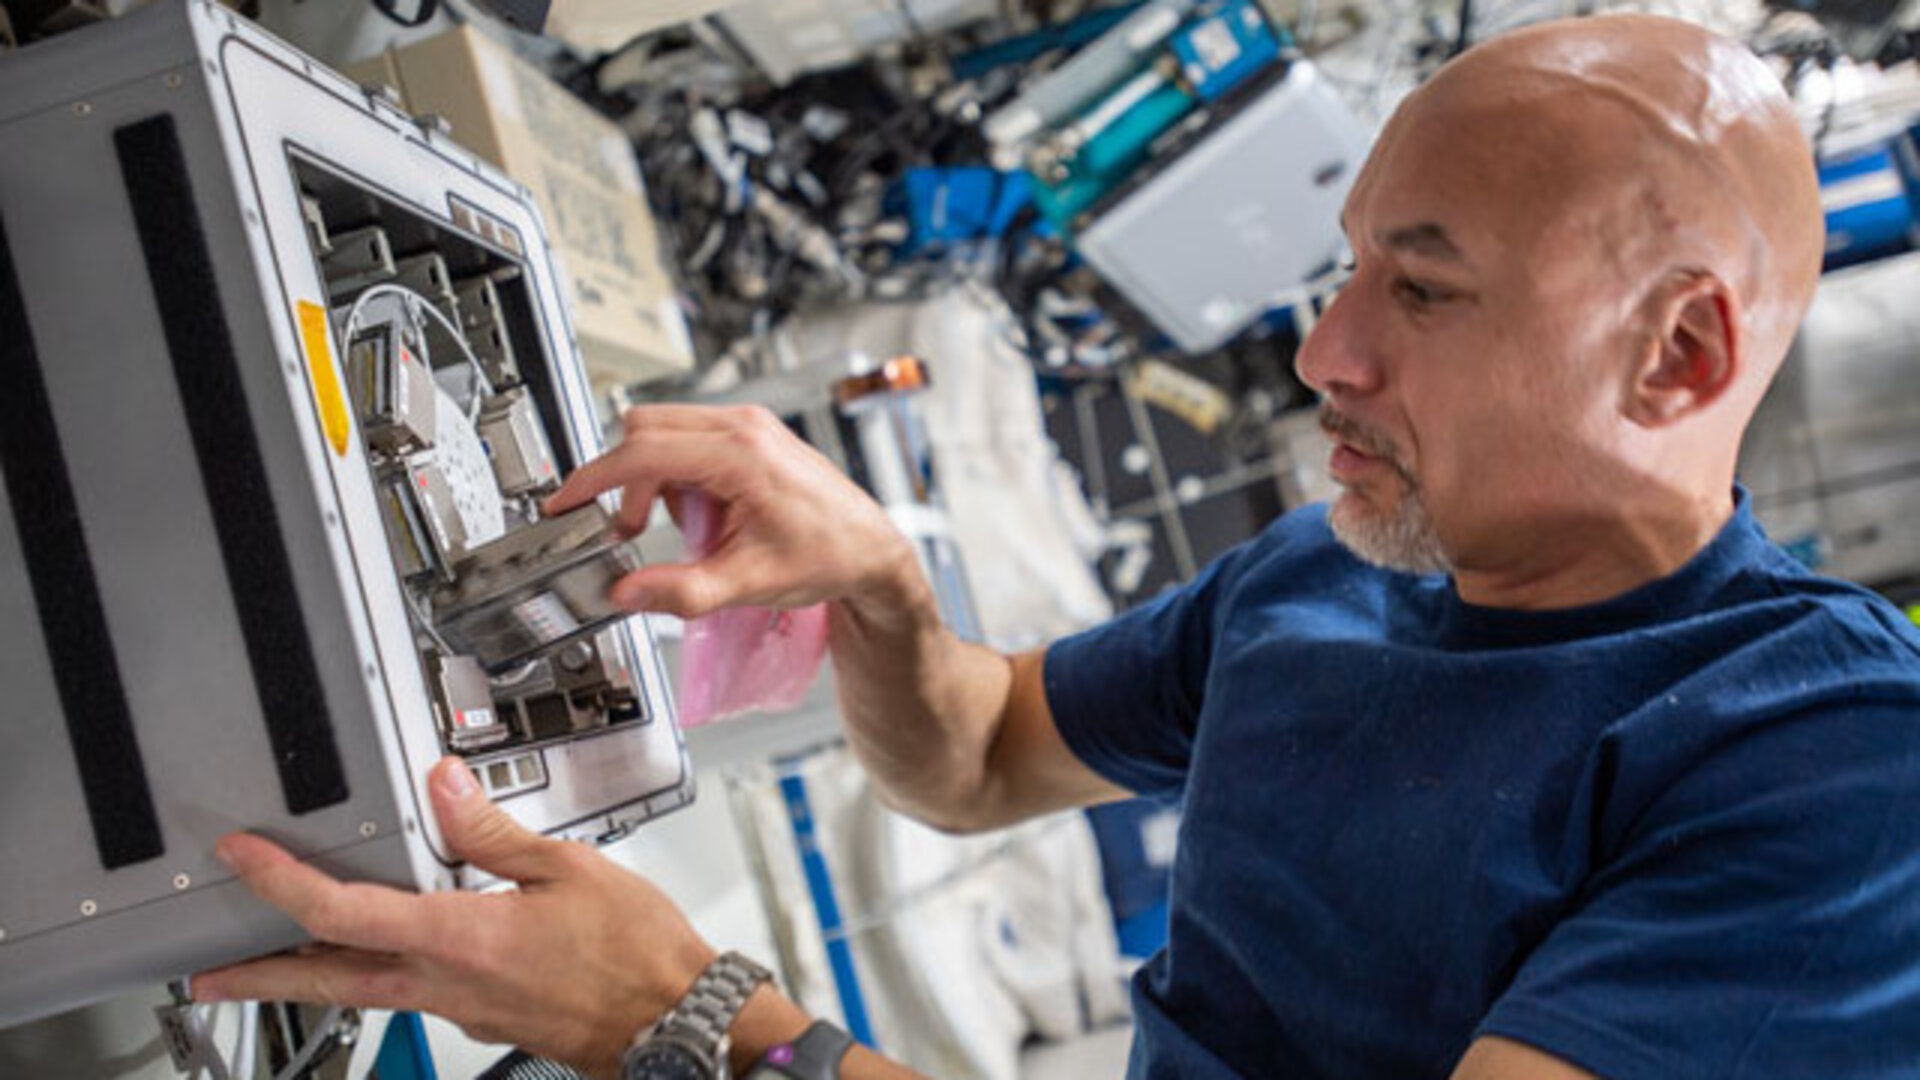 ESA astronaut Luca Parmitano installs a device to test how biofilms grow in altered gravity conditions